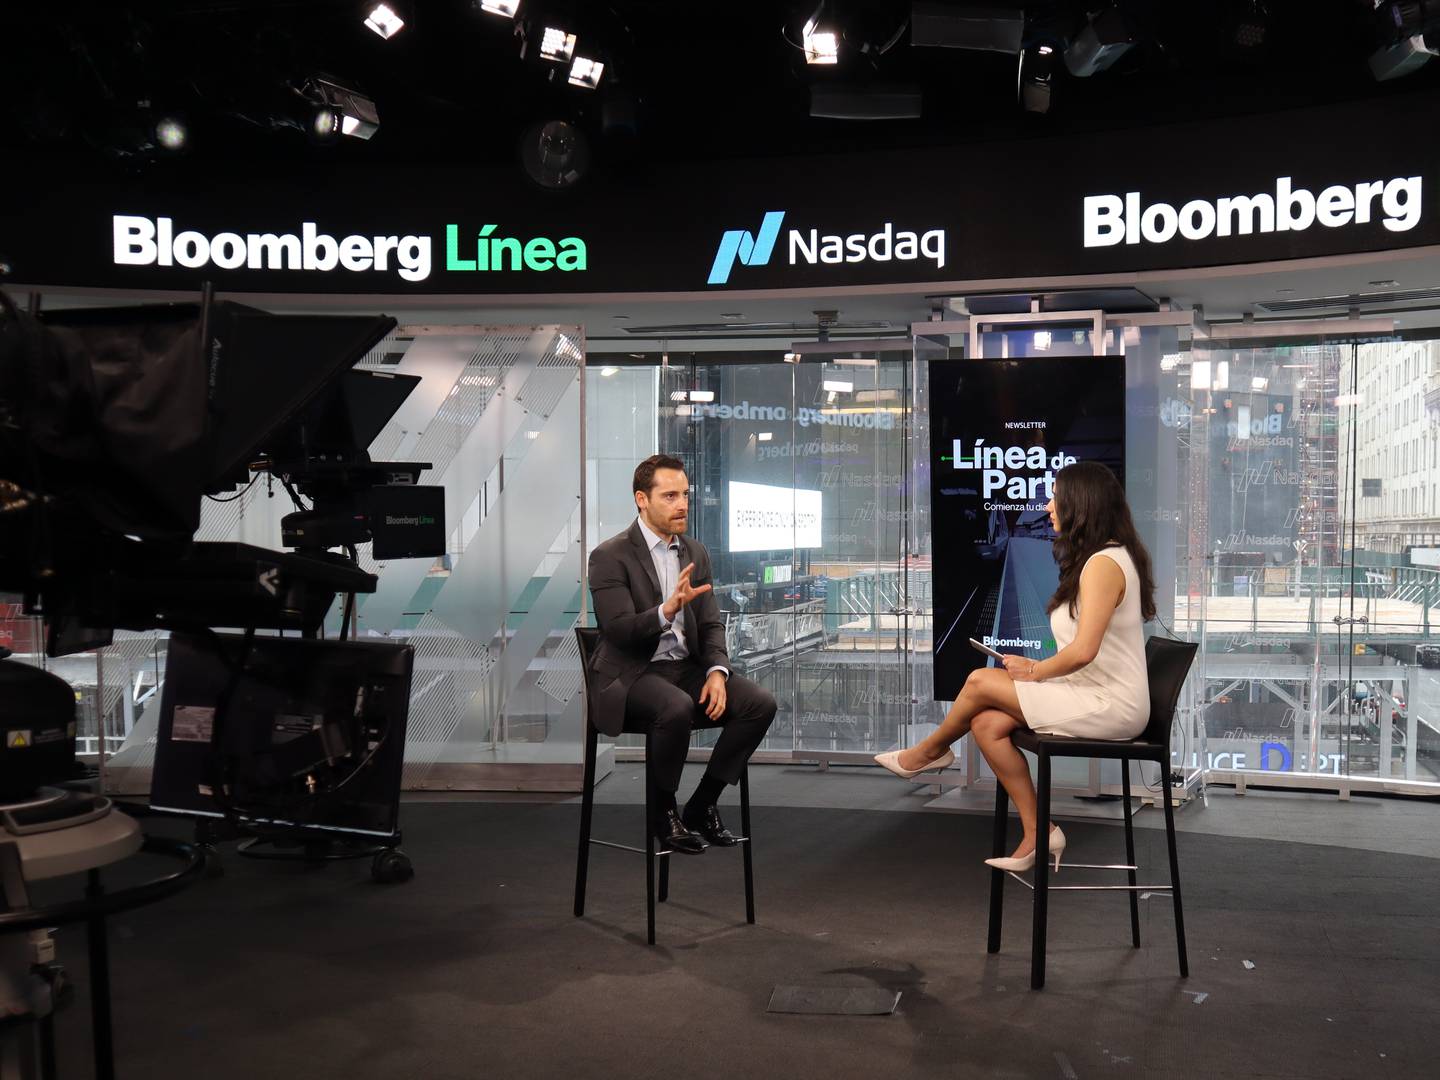 Thiago Lofiego, head of Equity Research for Metals at Bradesco BBI, in an interview in New York with Bloomberg Línea's Jimena Tolama.